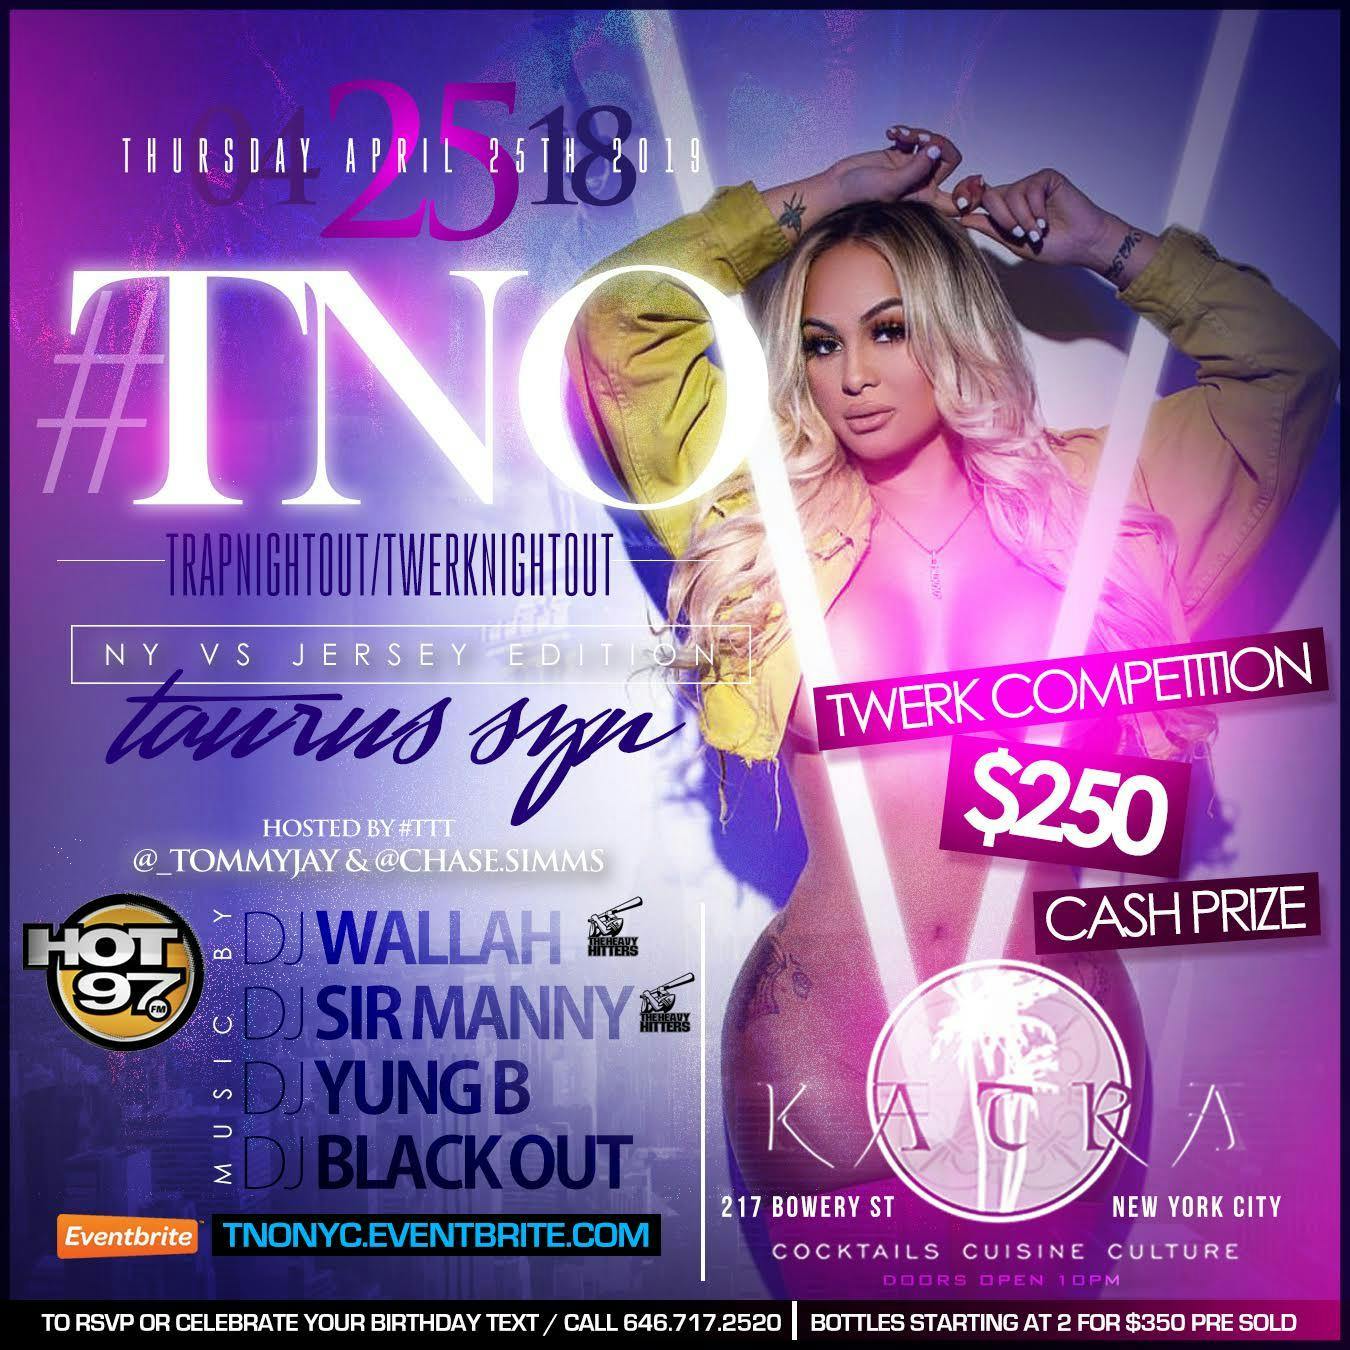 Hot 97 Chase Simms Events #TNO Trap Night Out Gemini Affair at Katra Lounge Tequila Open Bar Ladies Free Entry @Chase.Simms